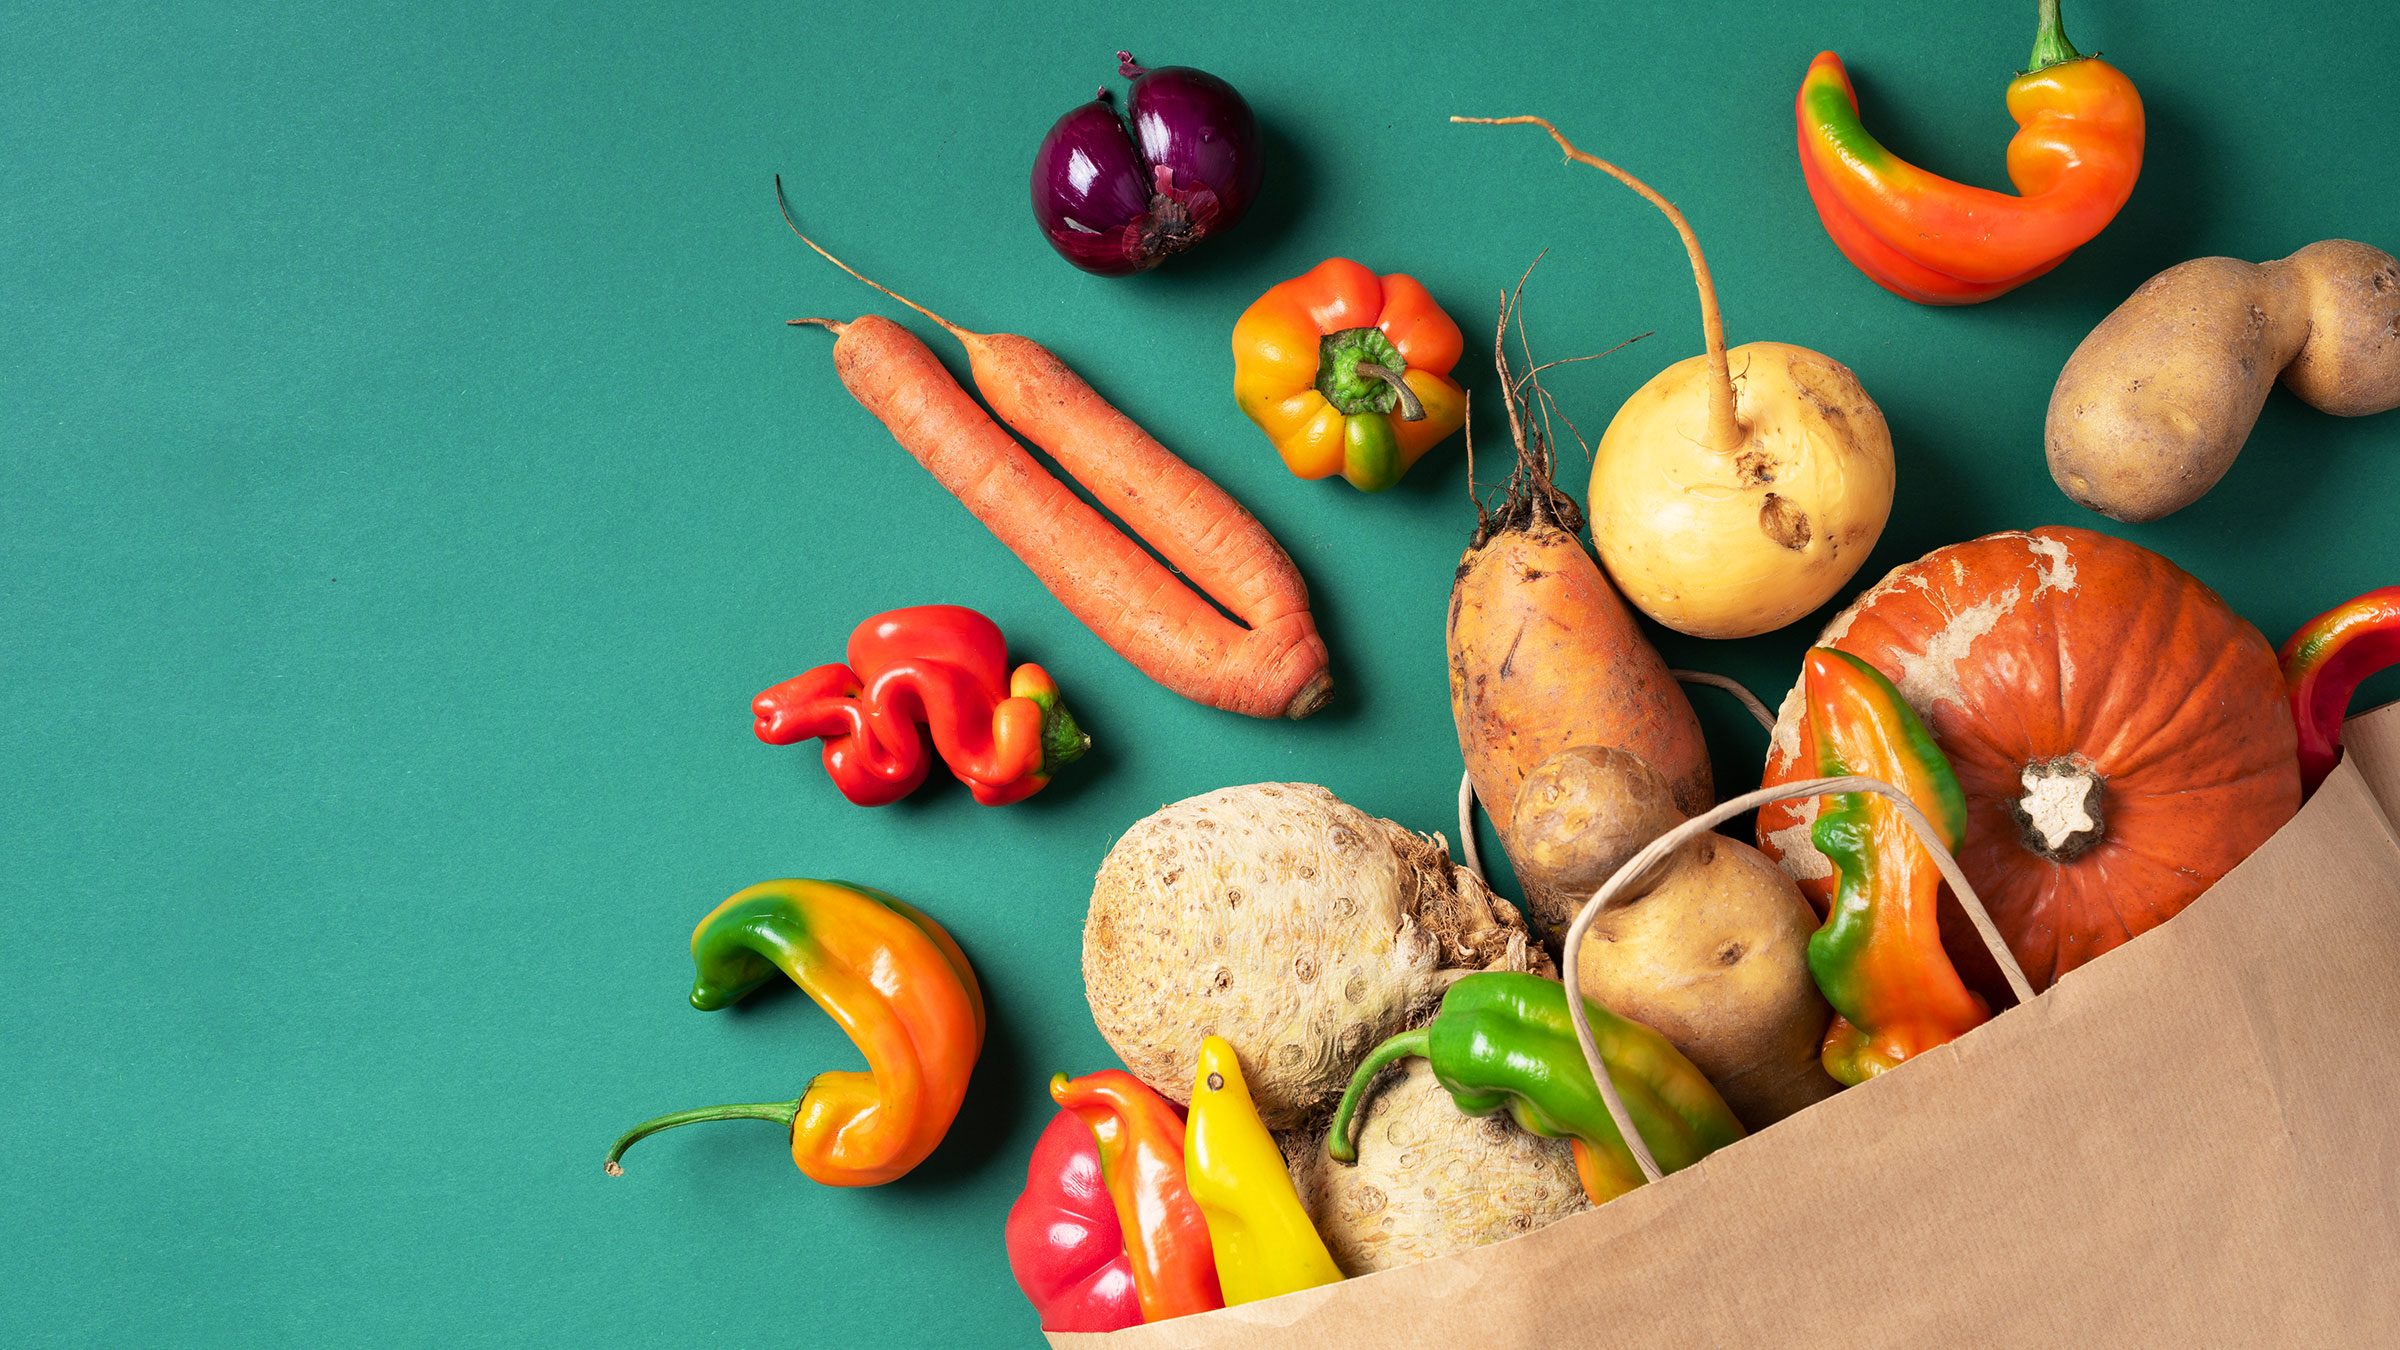 The future’s bright, the future’s wonky: exploring shifting consumer attitudes to imperfect produce